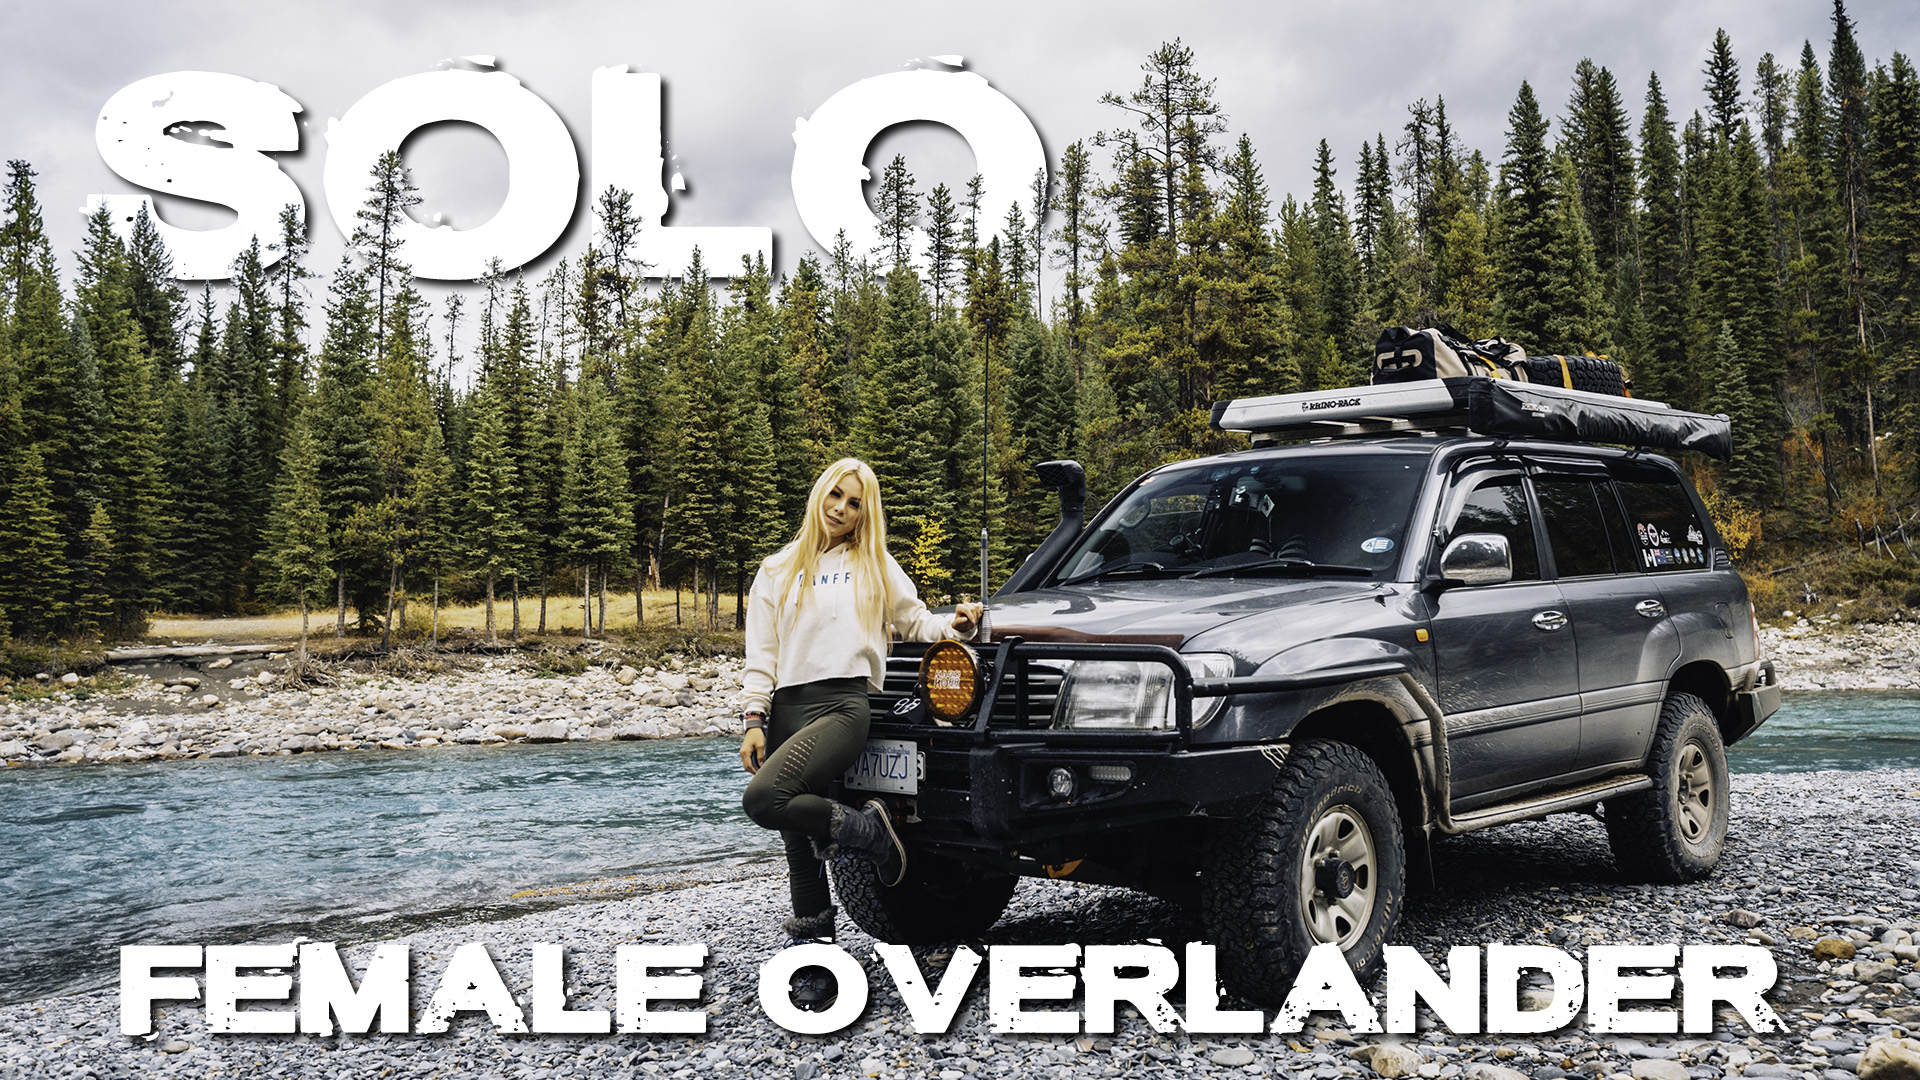 Solo overlanding safety tips